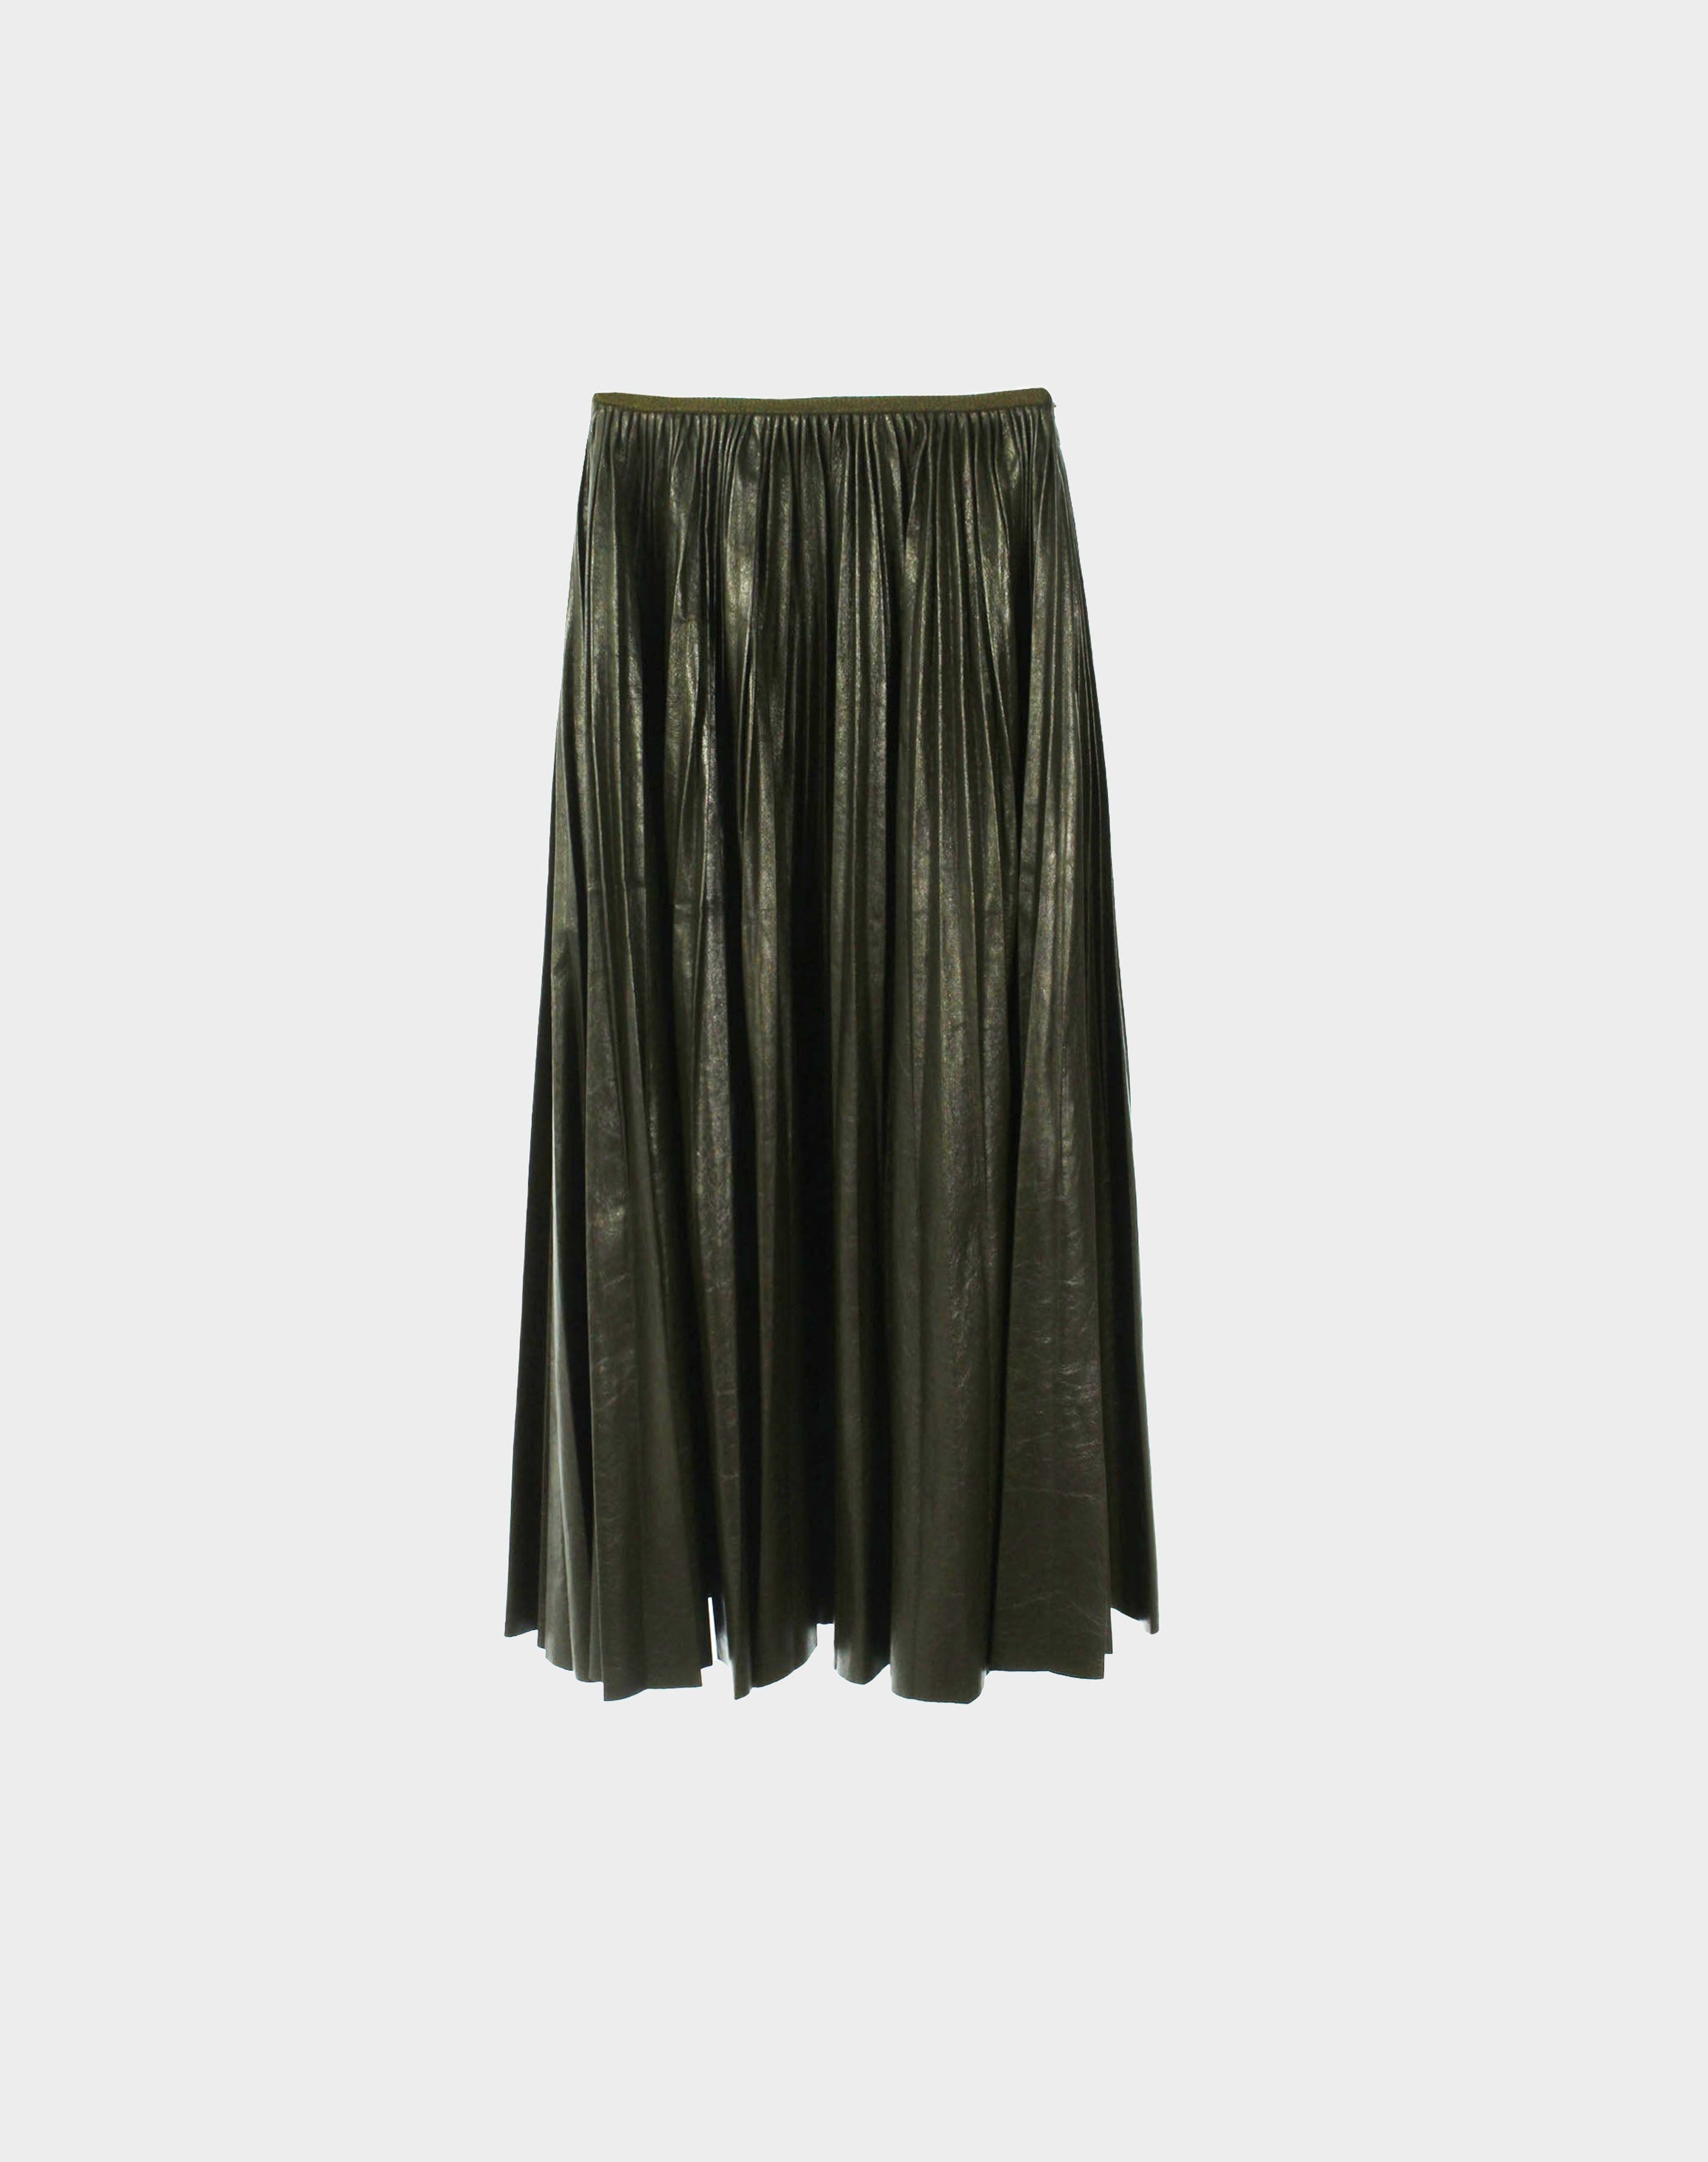 Céline by Phoebe Philo 2010s Pleated Leather Skirt